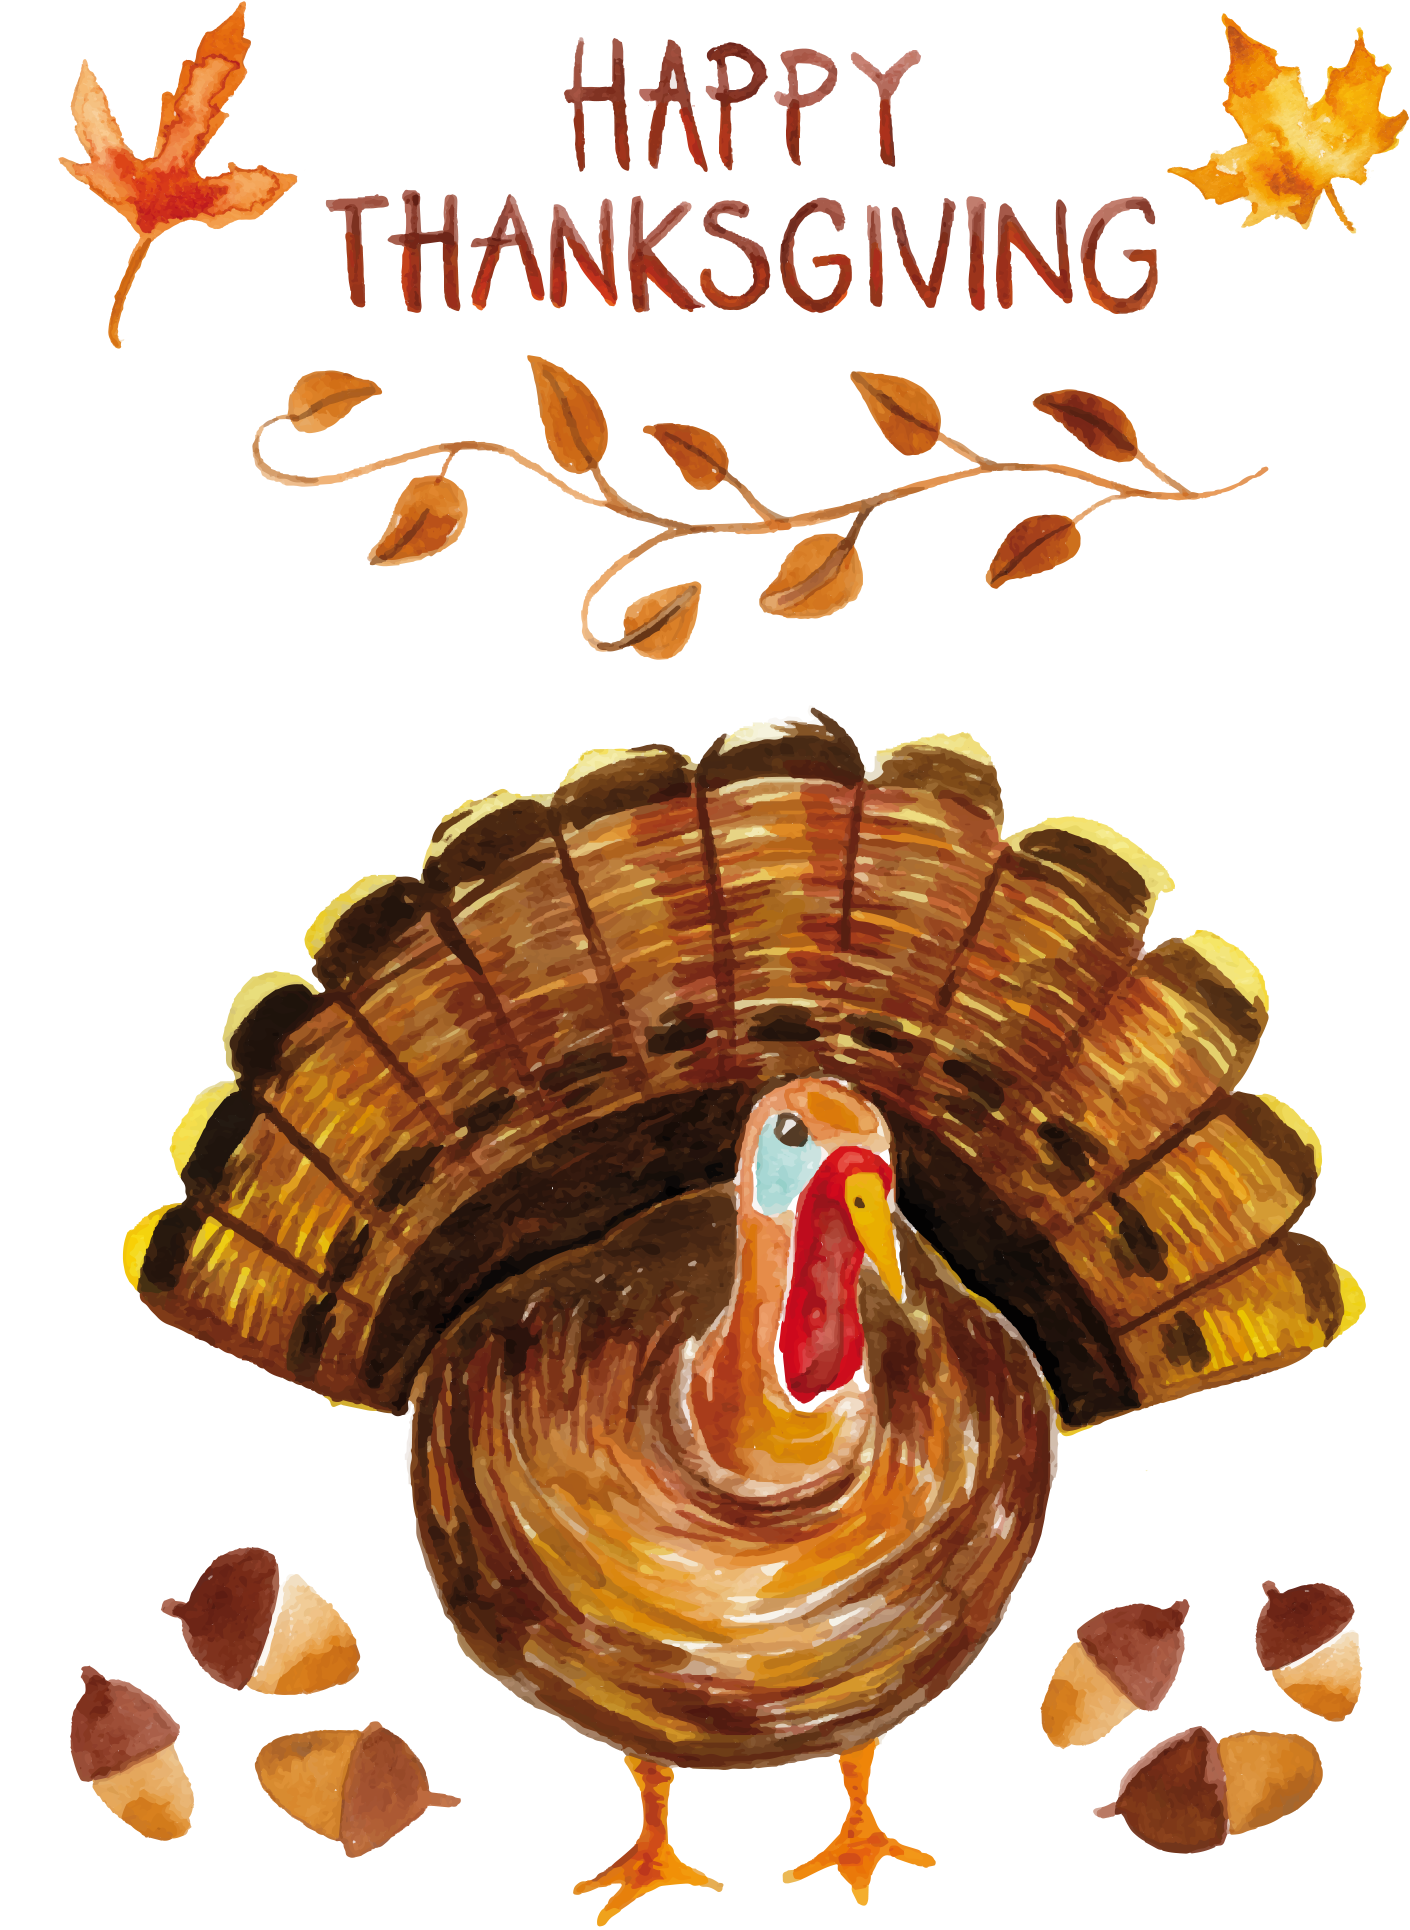 Turkey Watercolor Painting Thanksgiving - Happy Thanksgiving Turkey Poster (1410x1930)